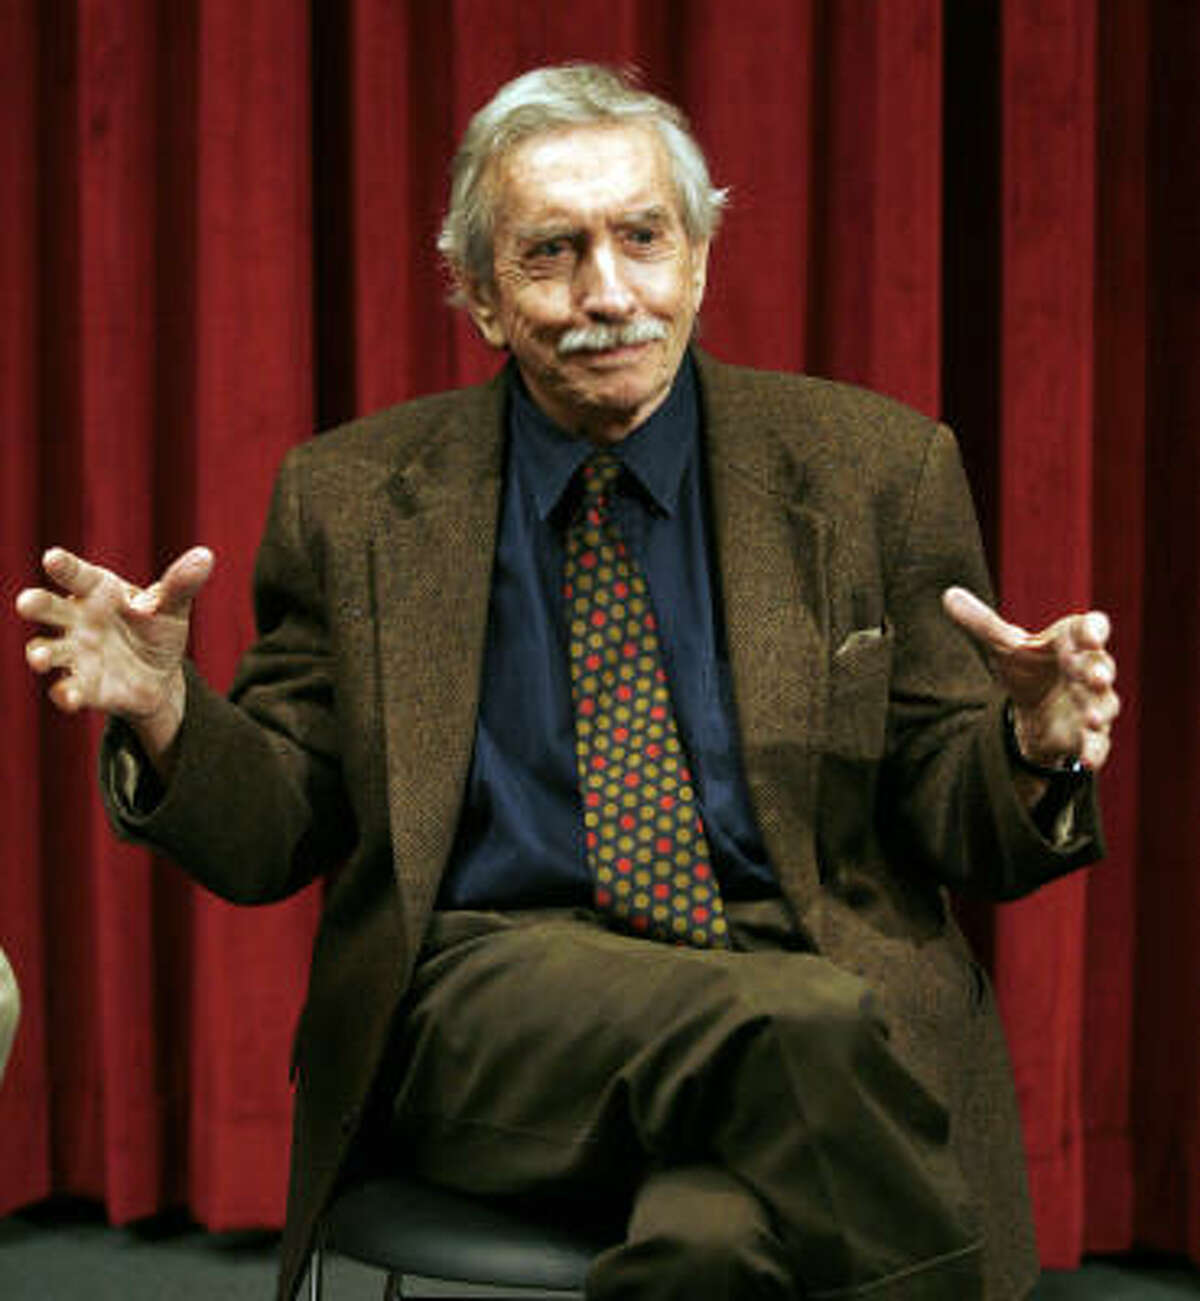 Pulitzer Prize-winning playwright Edward Albee said he's returning to the University of Houston because he missed teaching.